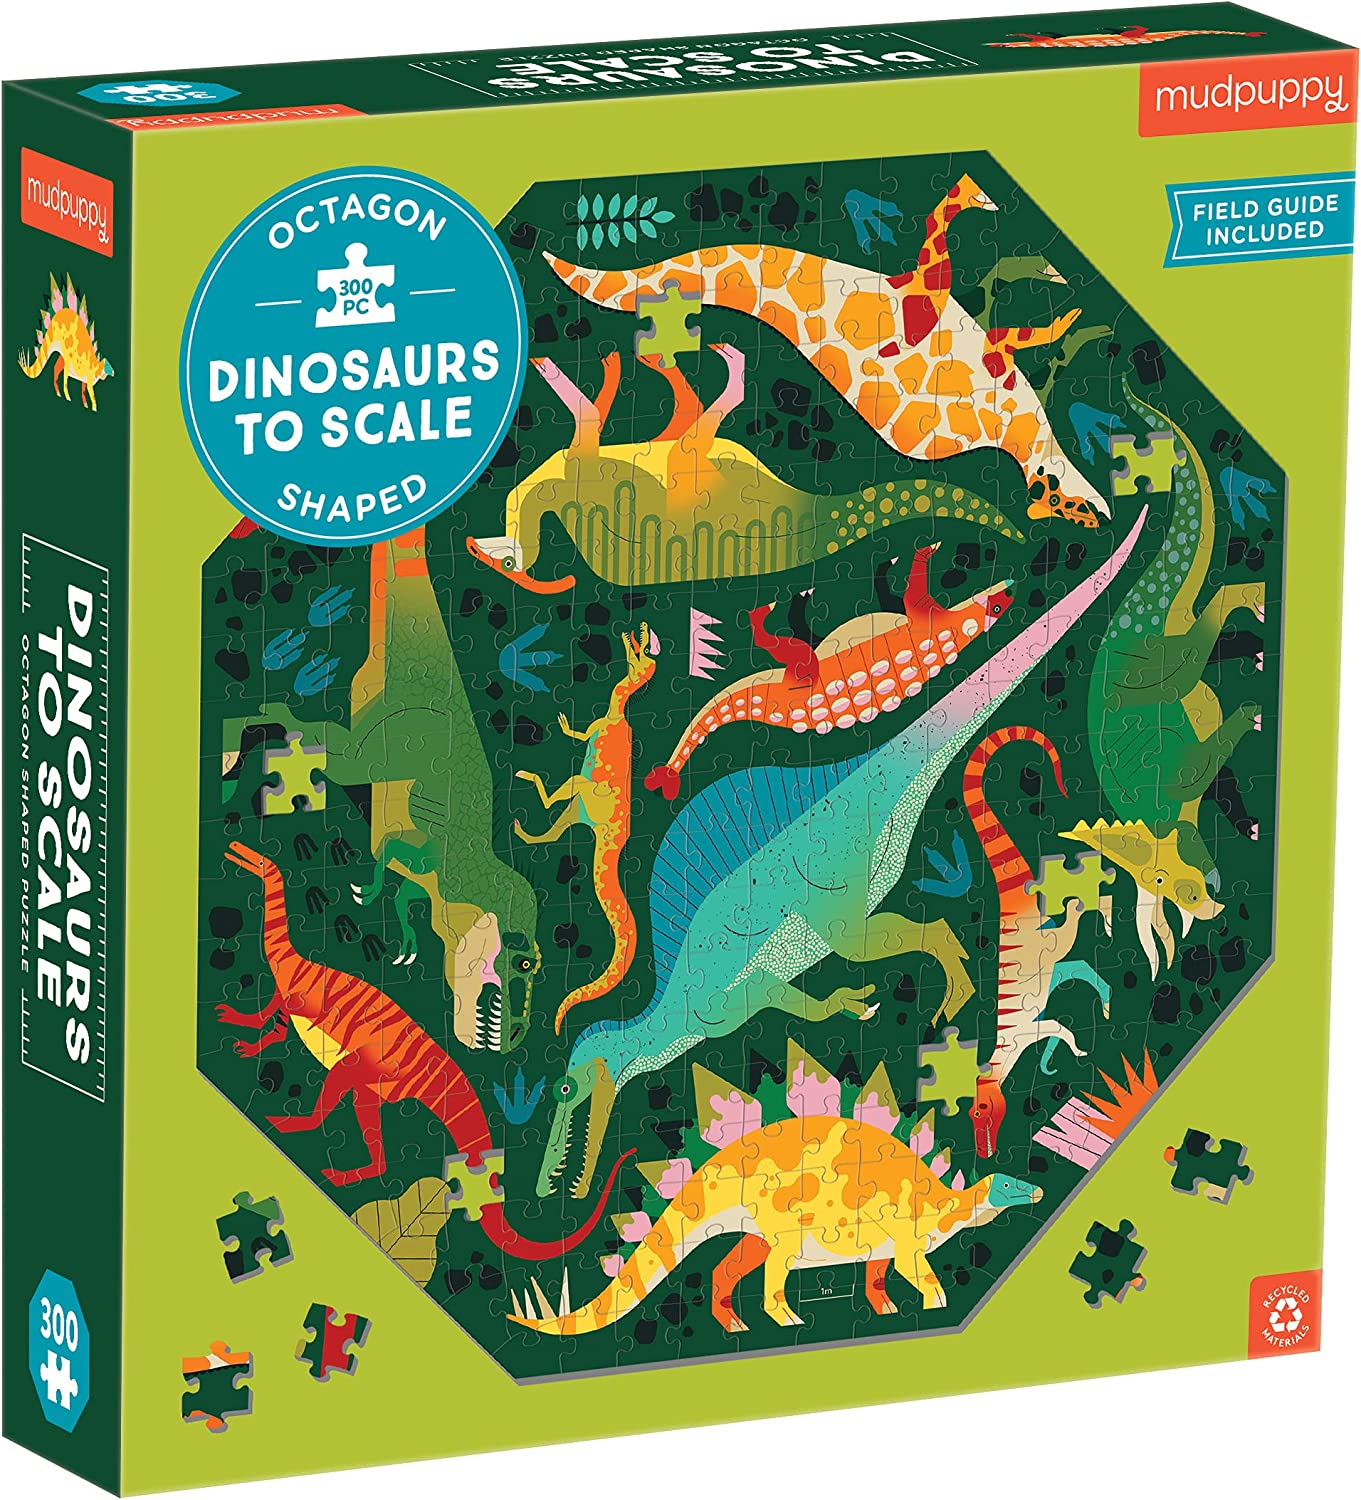 Puzzle: Dinosaurs to Scale 300 Pieces (Octagon Shaped)